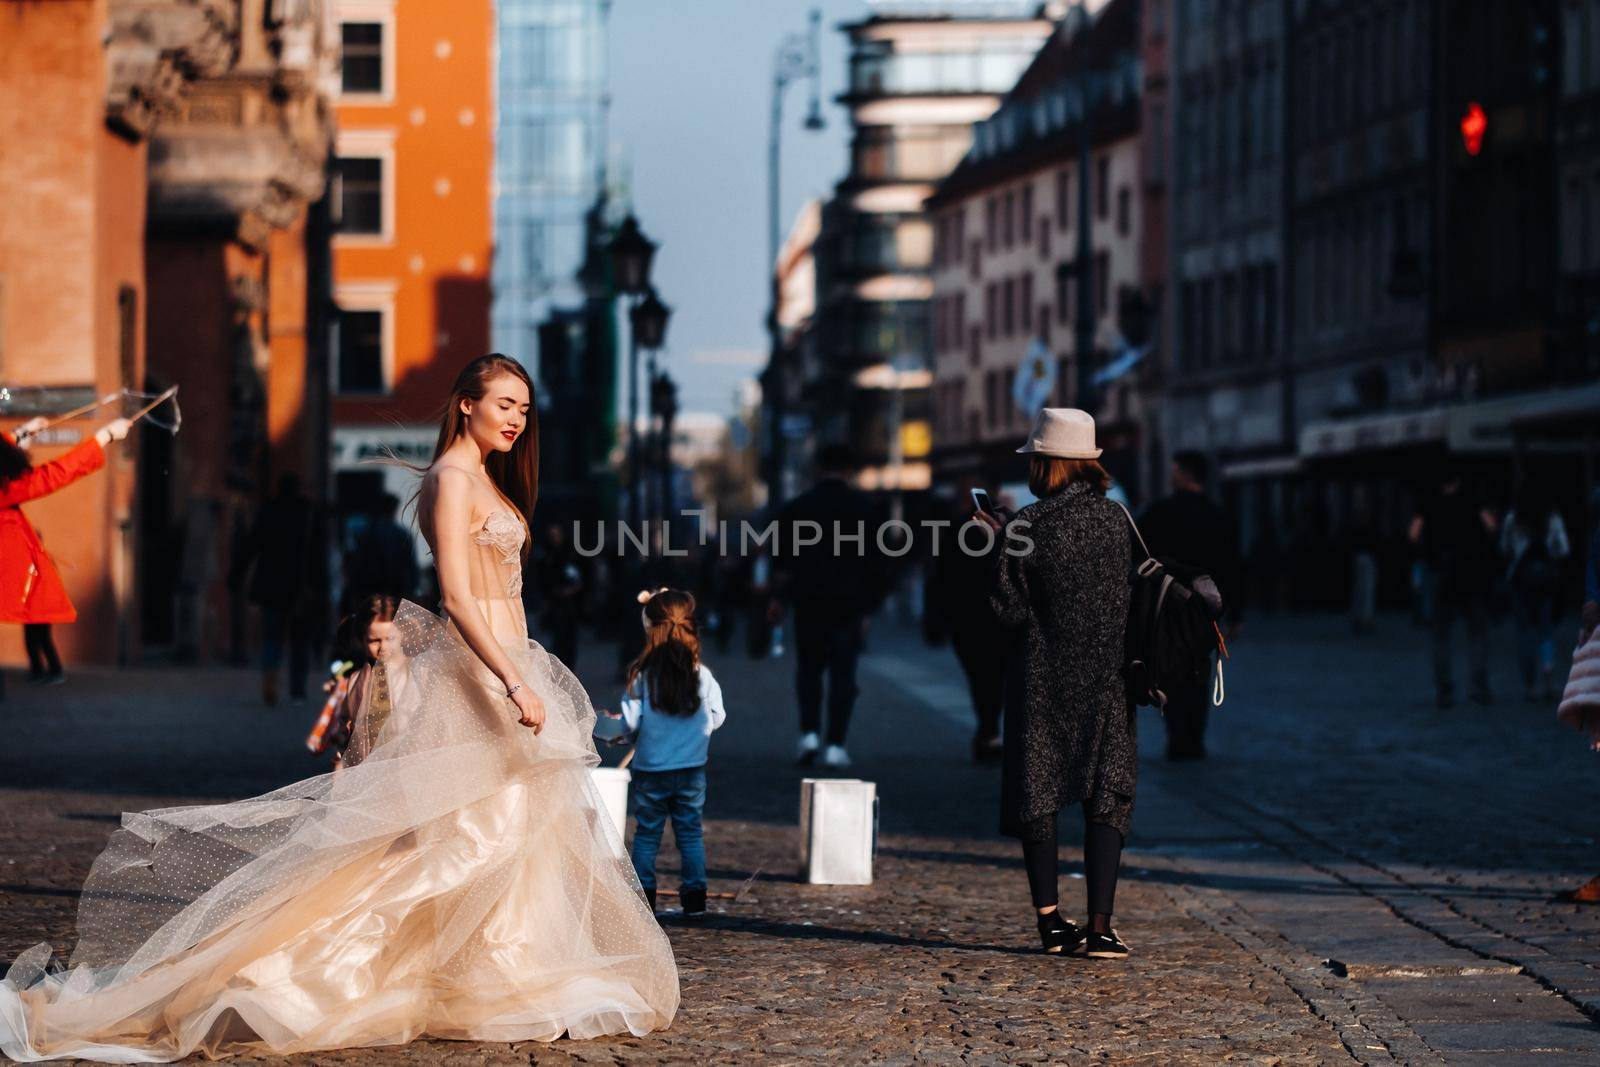 A bride in a wedding dress with long hair in the old town of Wroclaw. Wedding photo shoot in the center of an ancient city in Poland.Wroclaw, Poland by Lobachad